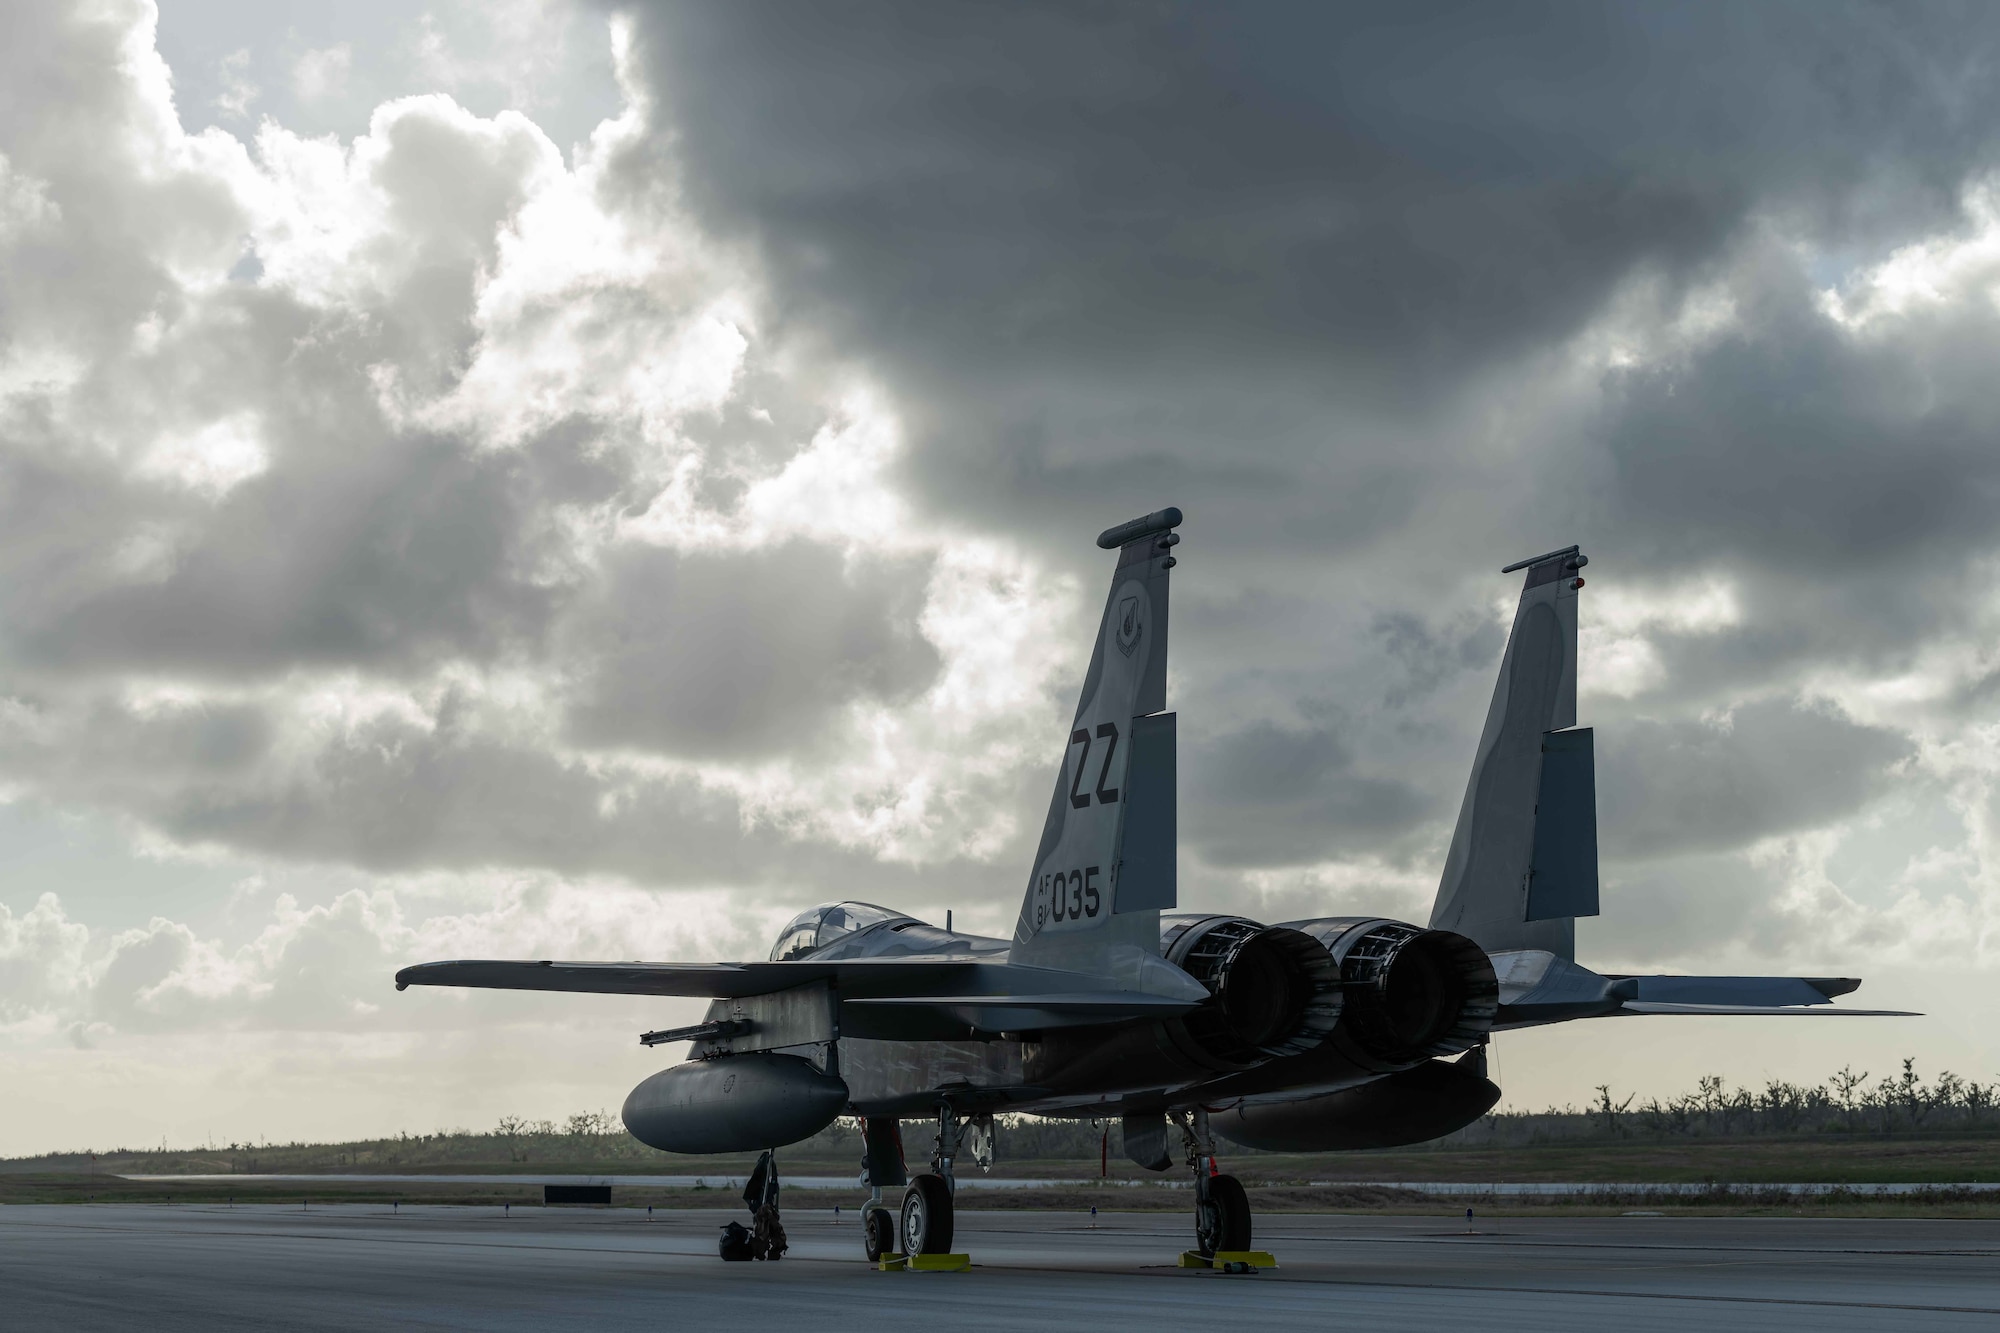 An F-15C Eagle from the 44th Fighter Squadron, Kadena Air Base, Japan, sits on the taxiway at Tinian International Airport, Tinian, during exercise Resilient Typhoon, April 23, 2019.  While on-ground, Airmen both practiced new fueling techniques for the jet aircraft and hosted a static display for local residents.  (U.S. Air Force photo by Airman 1st Class Matthew Seefeldt)